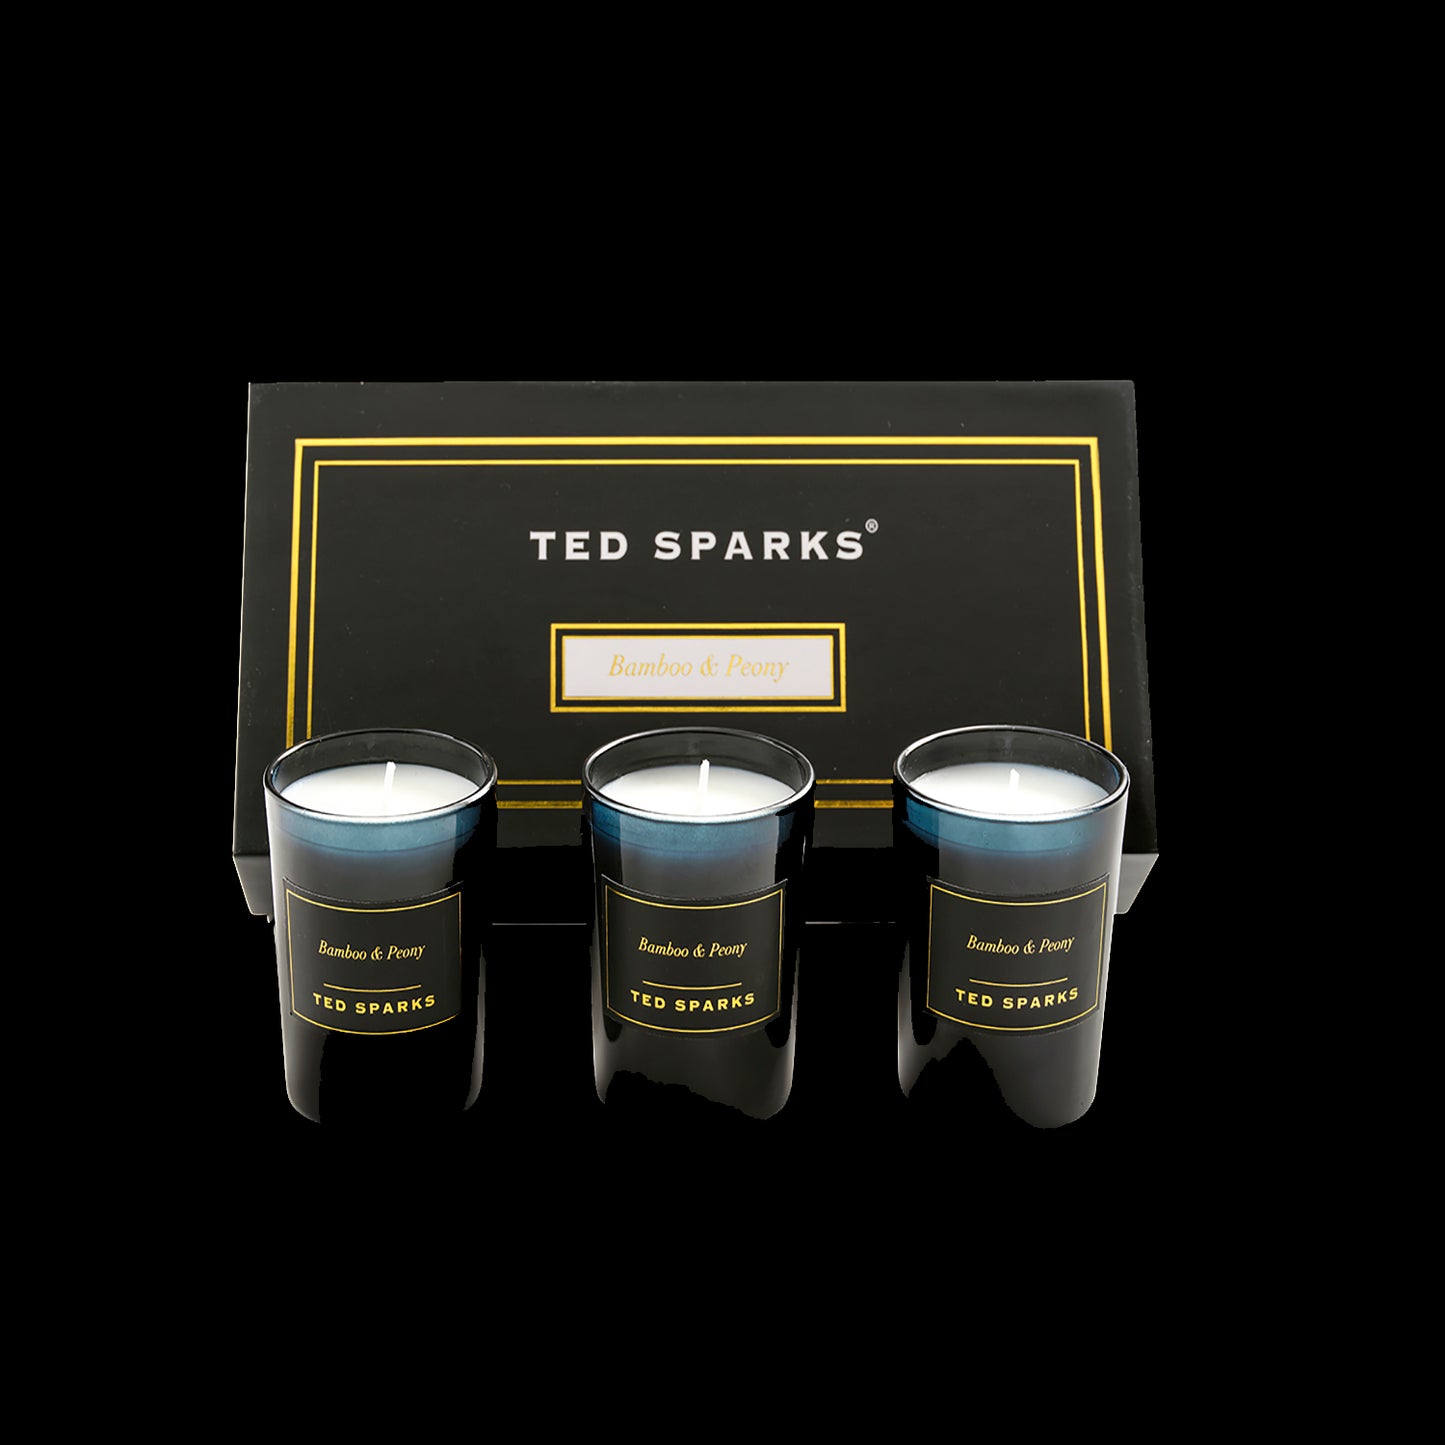 TED SPARKS Mini Candle Gift Set Bamboo &amp; Peony